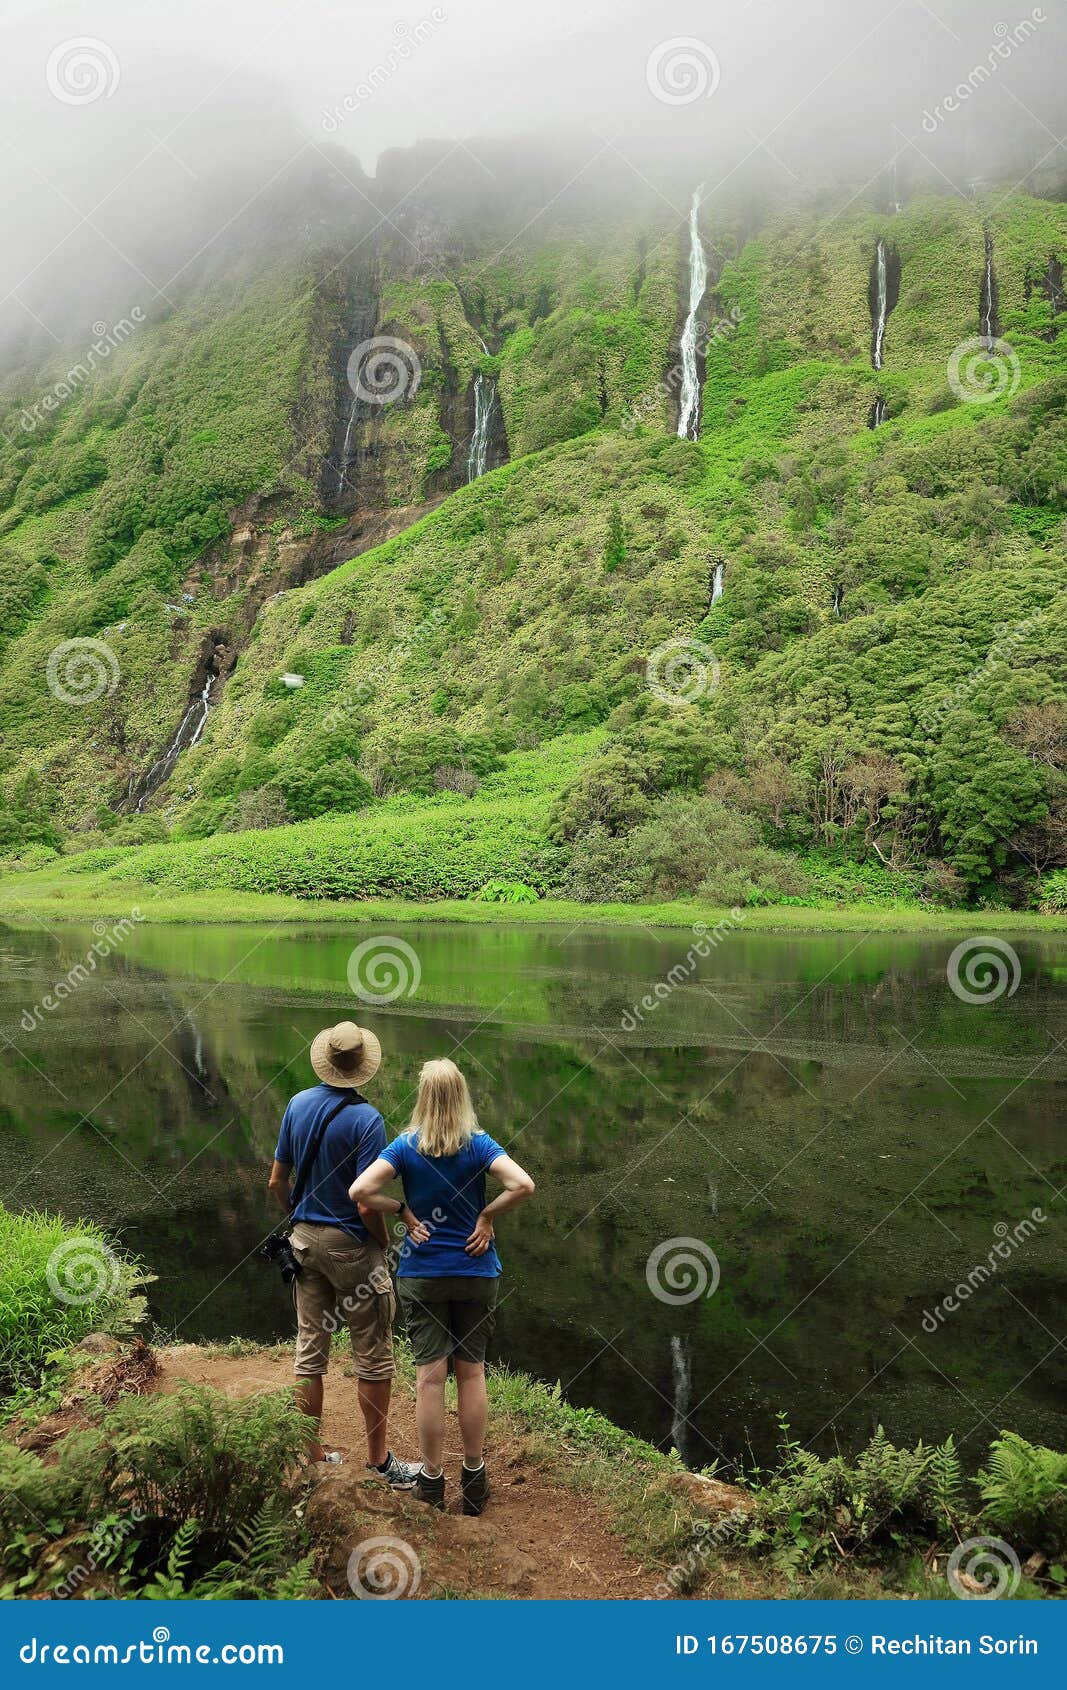 young couple enjoying the landscape of the waterfall in pozo da alagoinha.